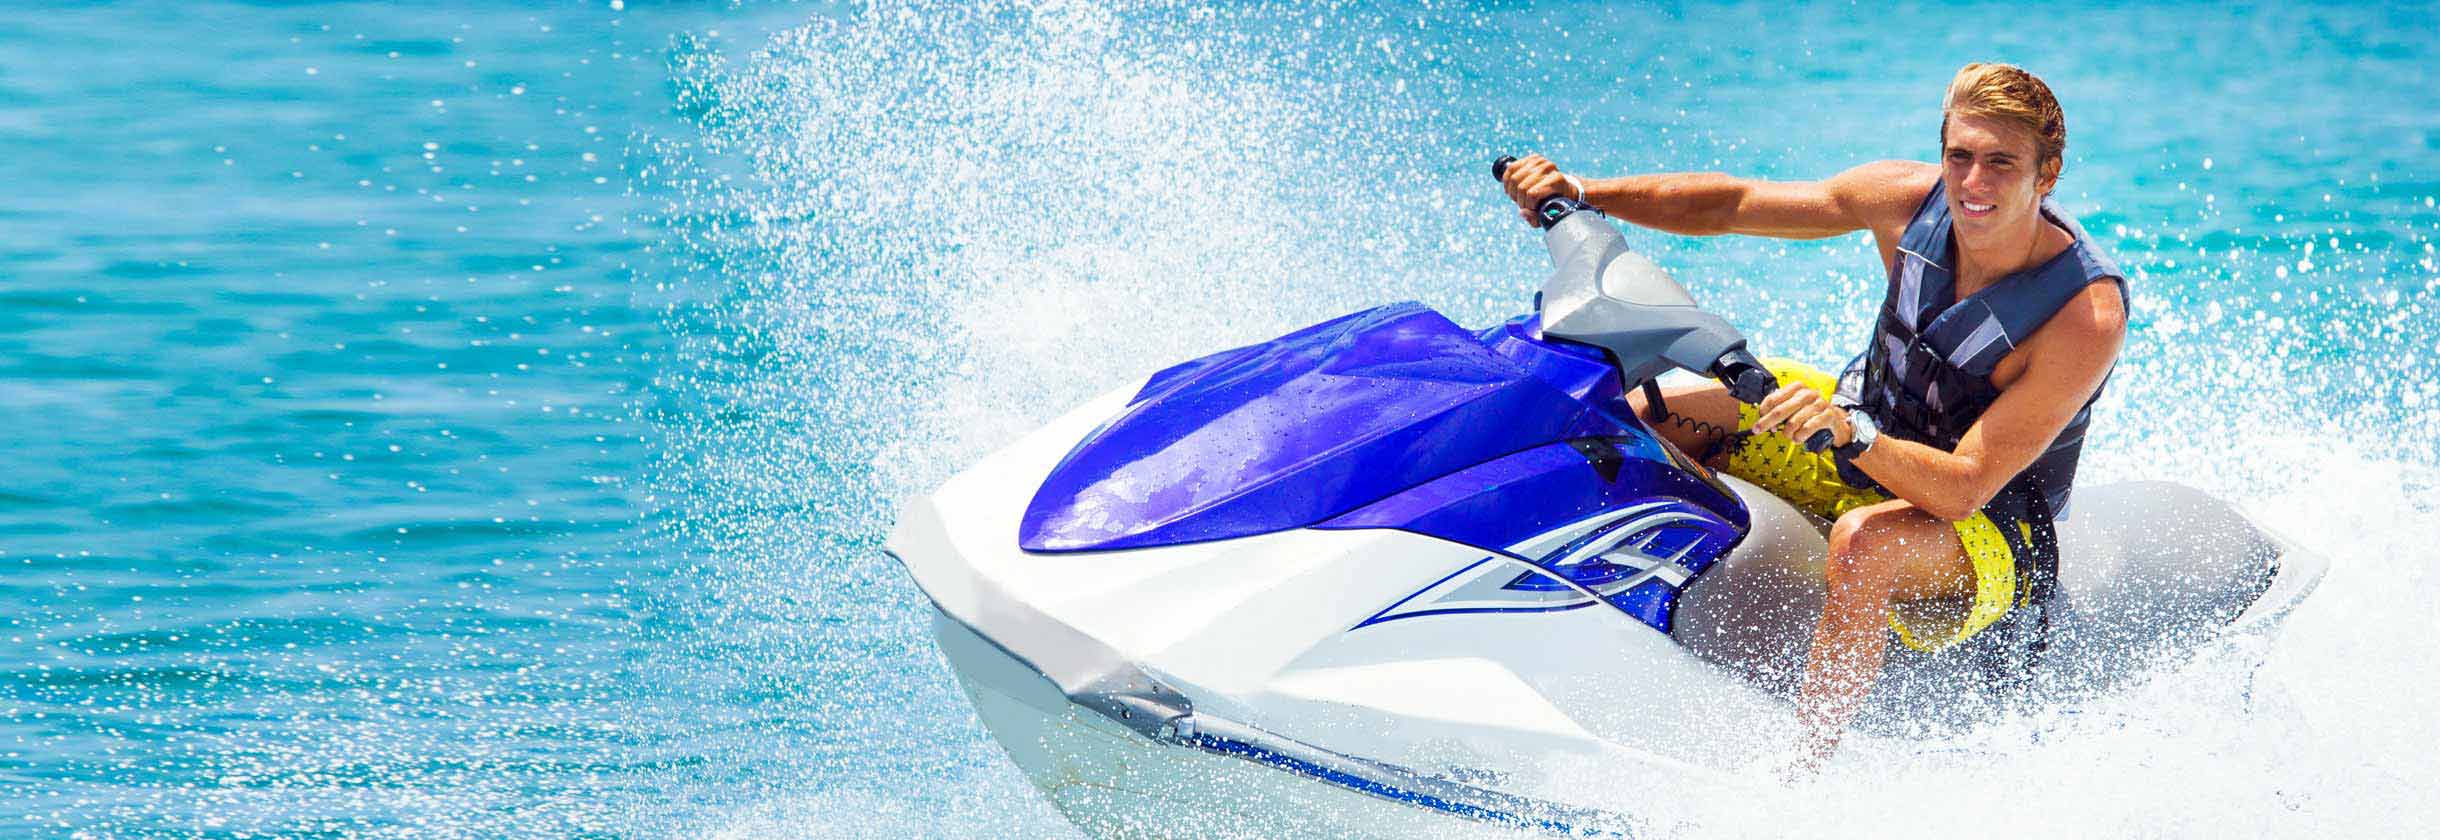 Person riding a jetski on the water.